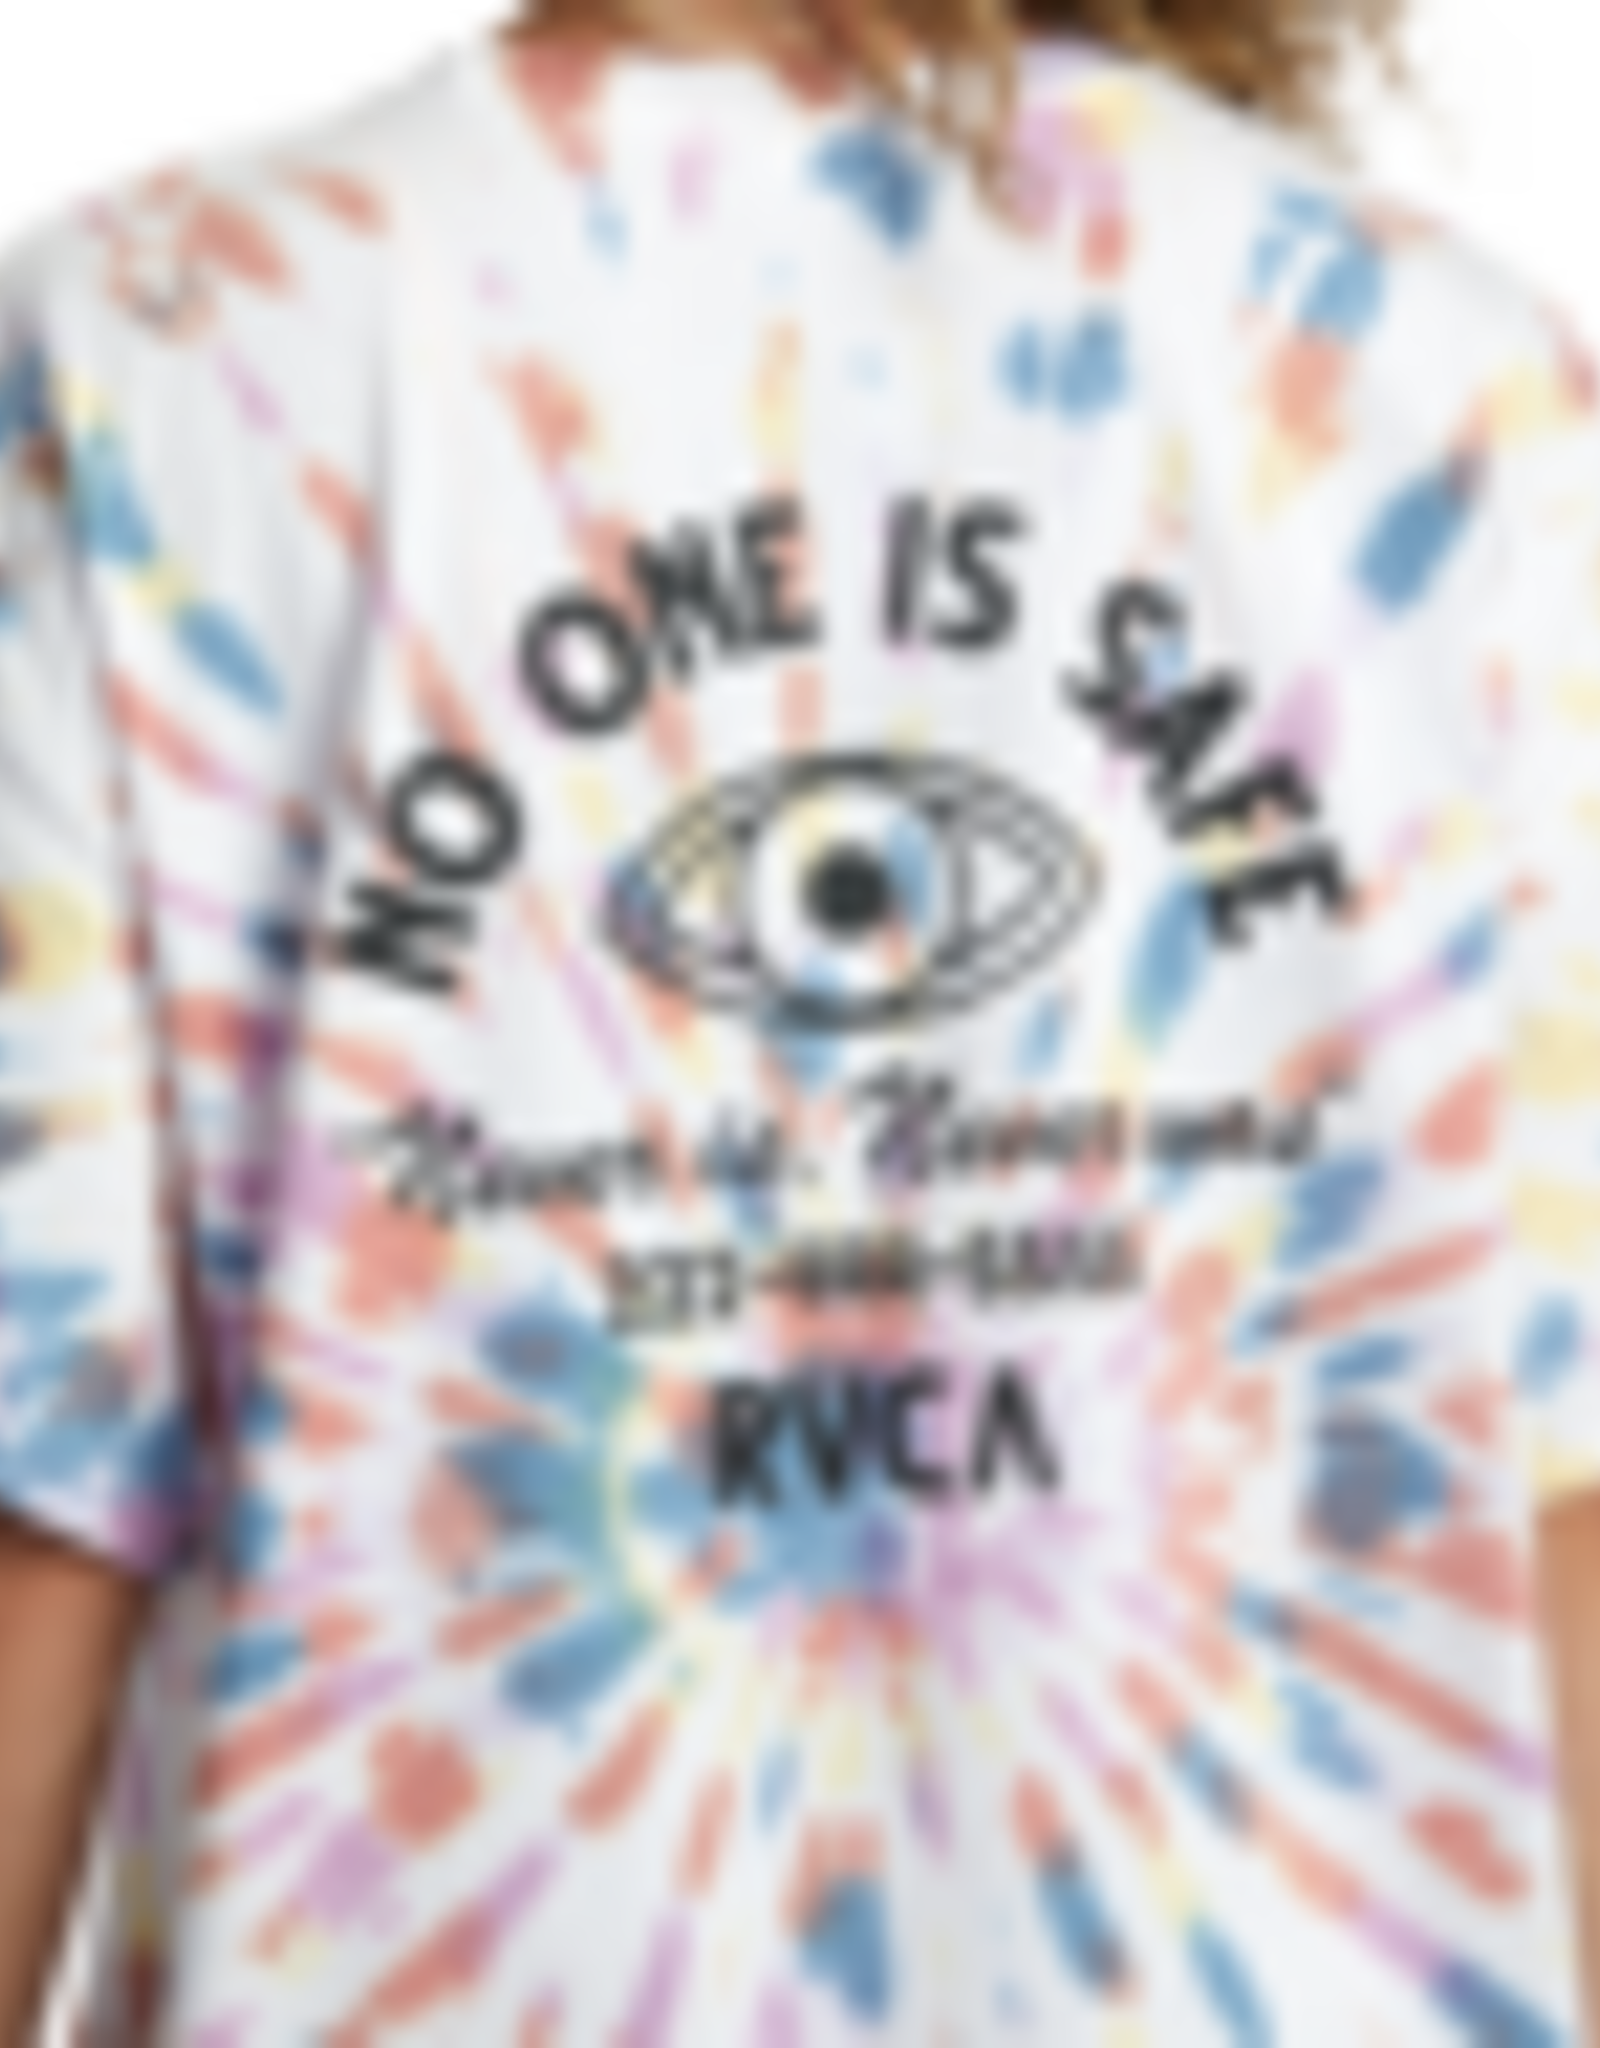 RVCA NEVER WAS SS